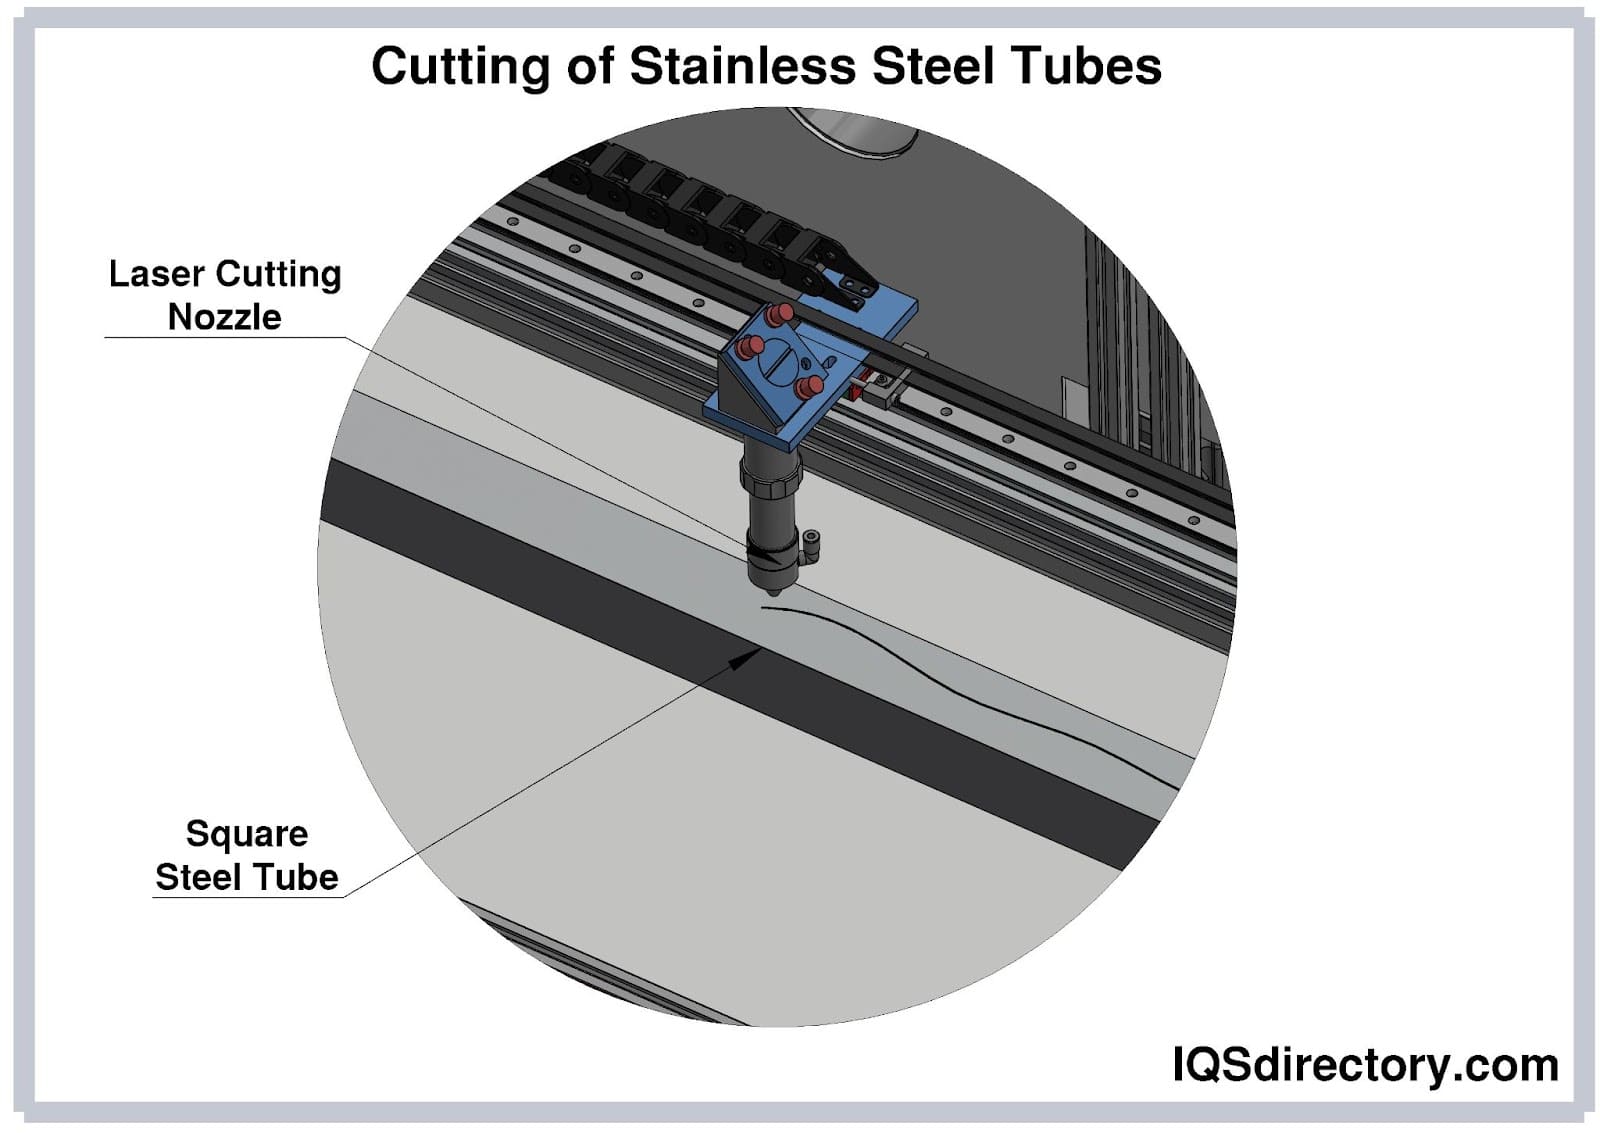 Stainless Steel Tubing: Types, Applications, Benefits, and